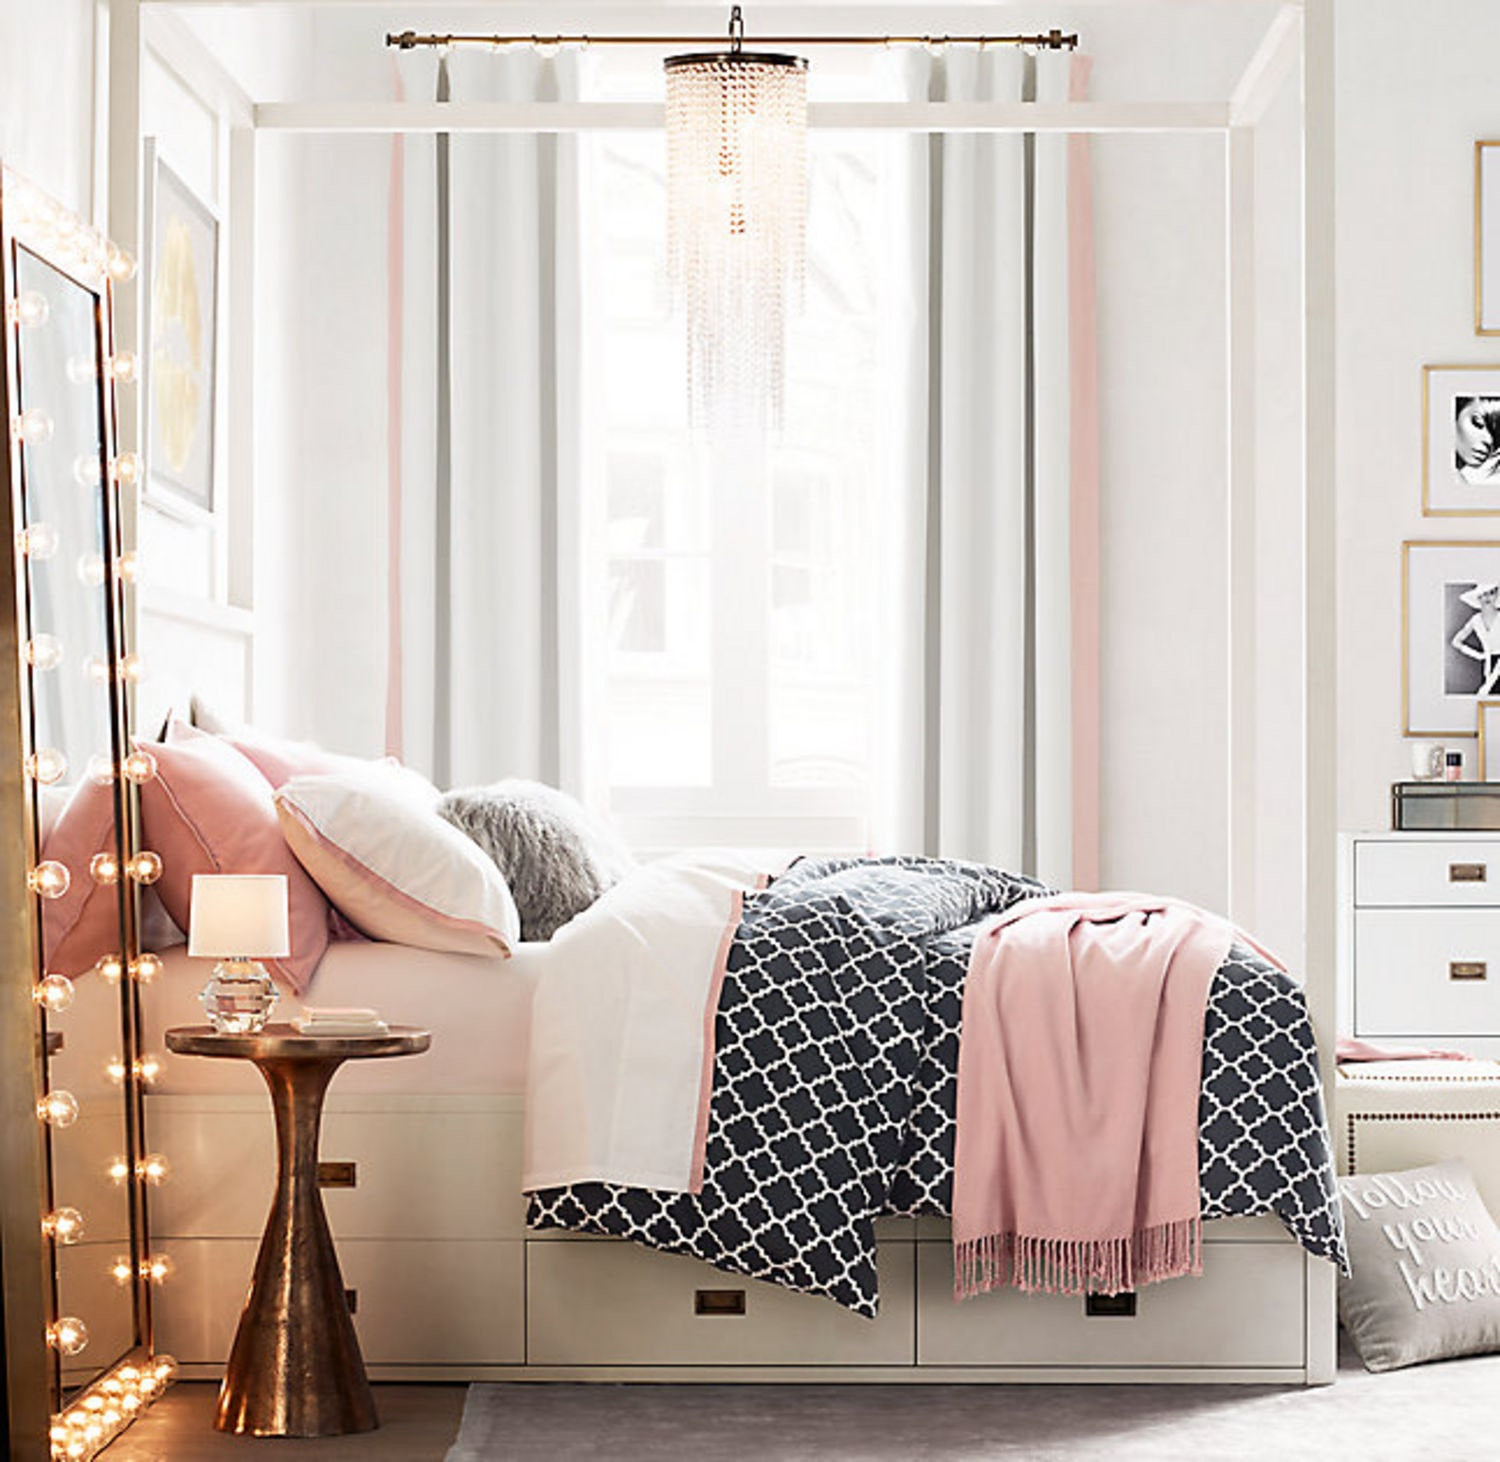 Small Teen Bedroom Ideas
 13 Things Your Tiny Apartment Needs From Restoration